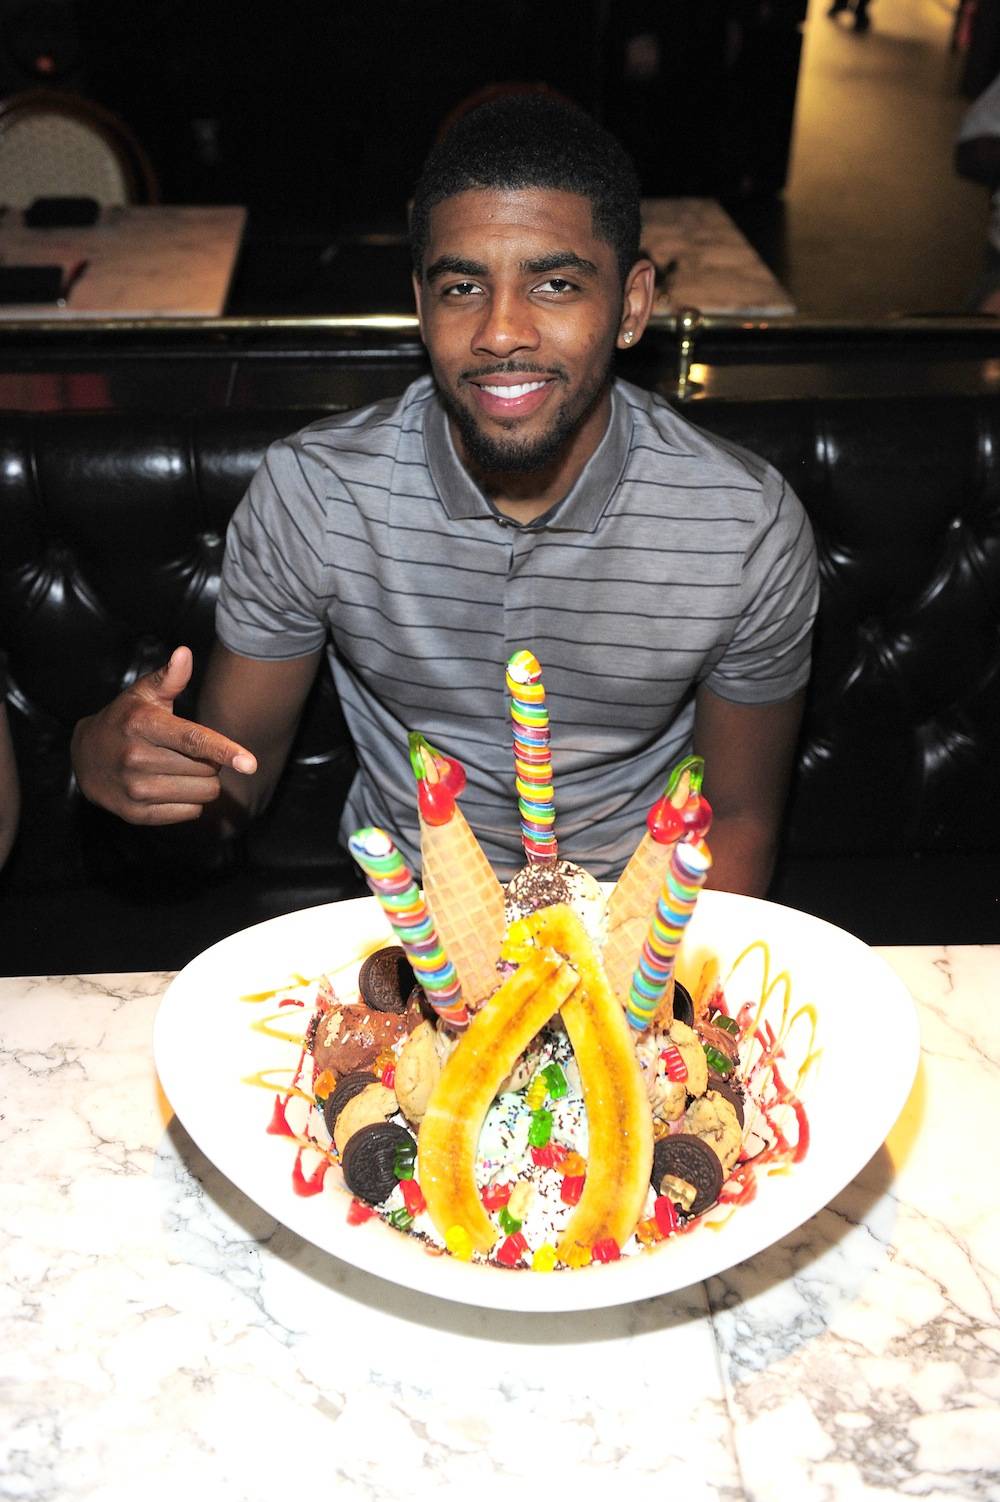 Kylie Irving dines at Sugar Factory American Brasserie for his birthday. Photos: Steven Lawton/WireImage 